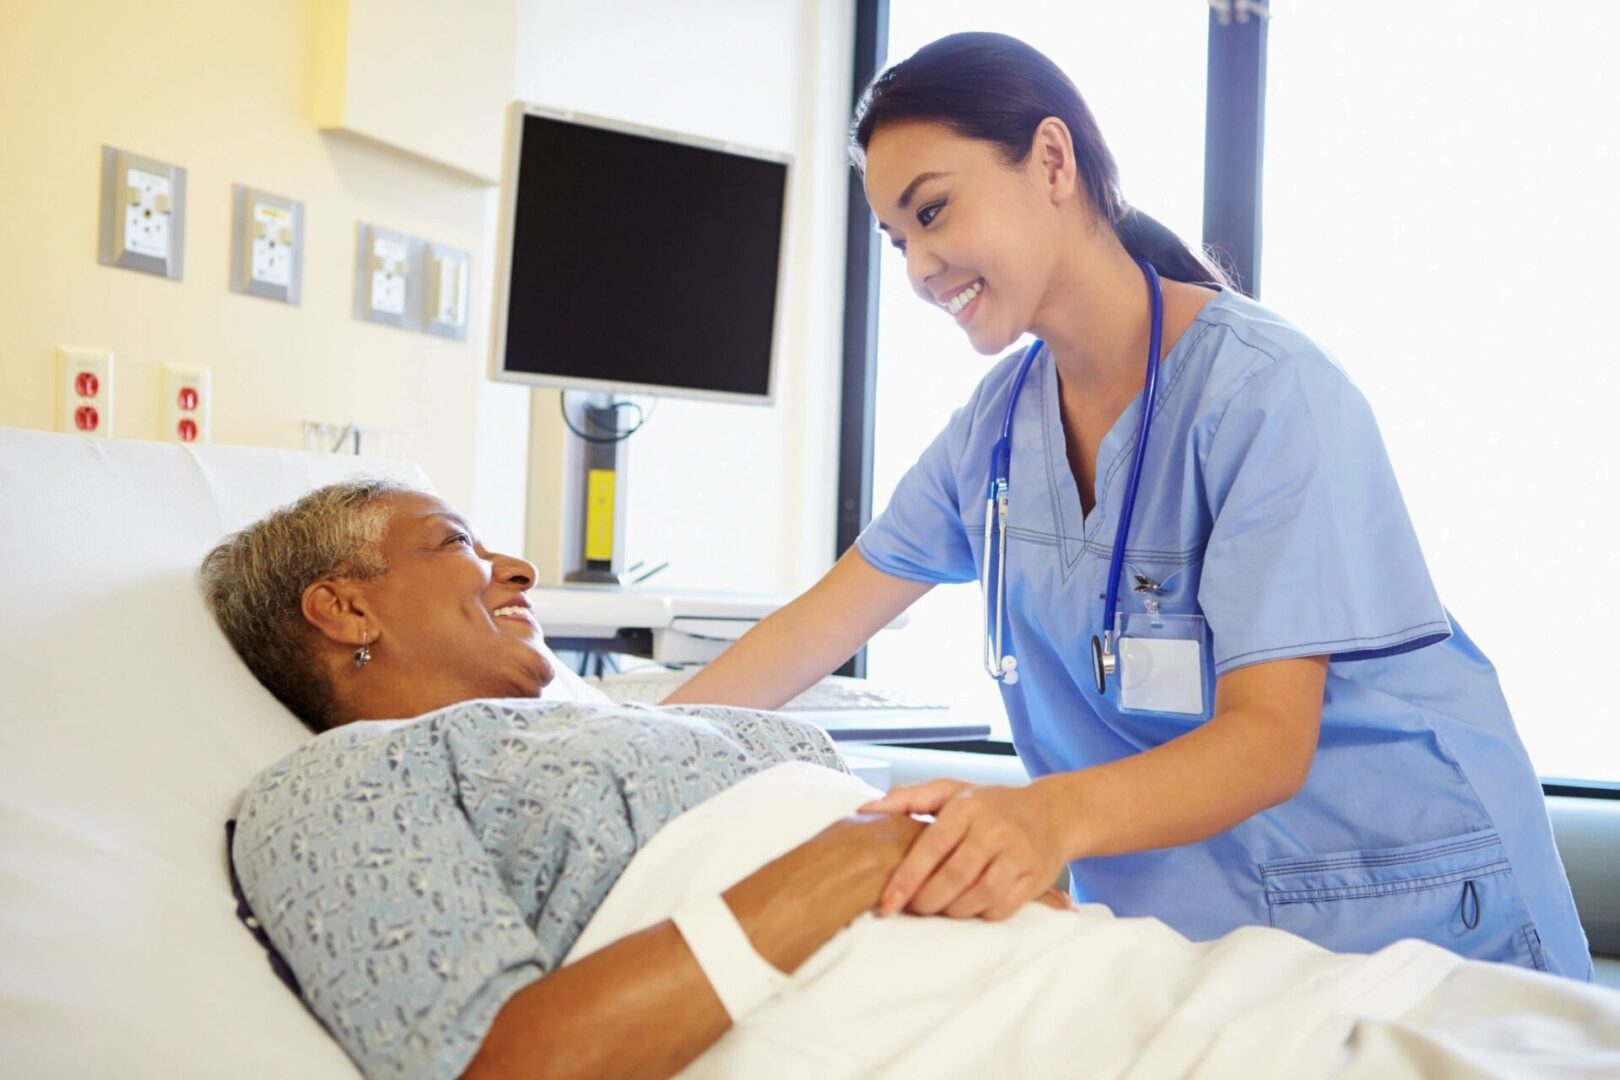 A nurse is caring for an elderly patient in the hospital.